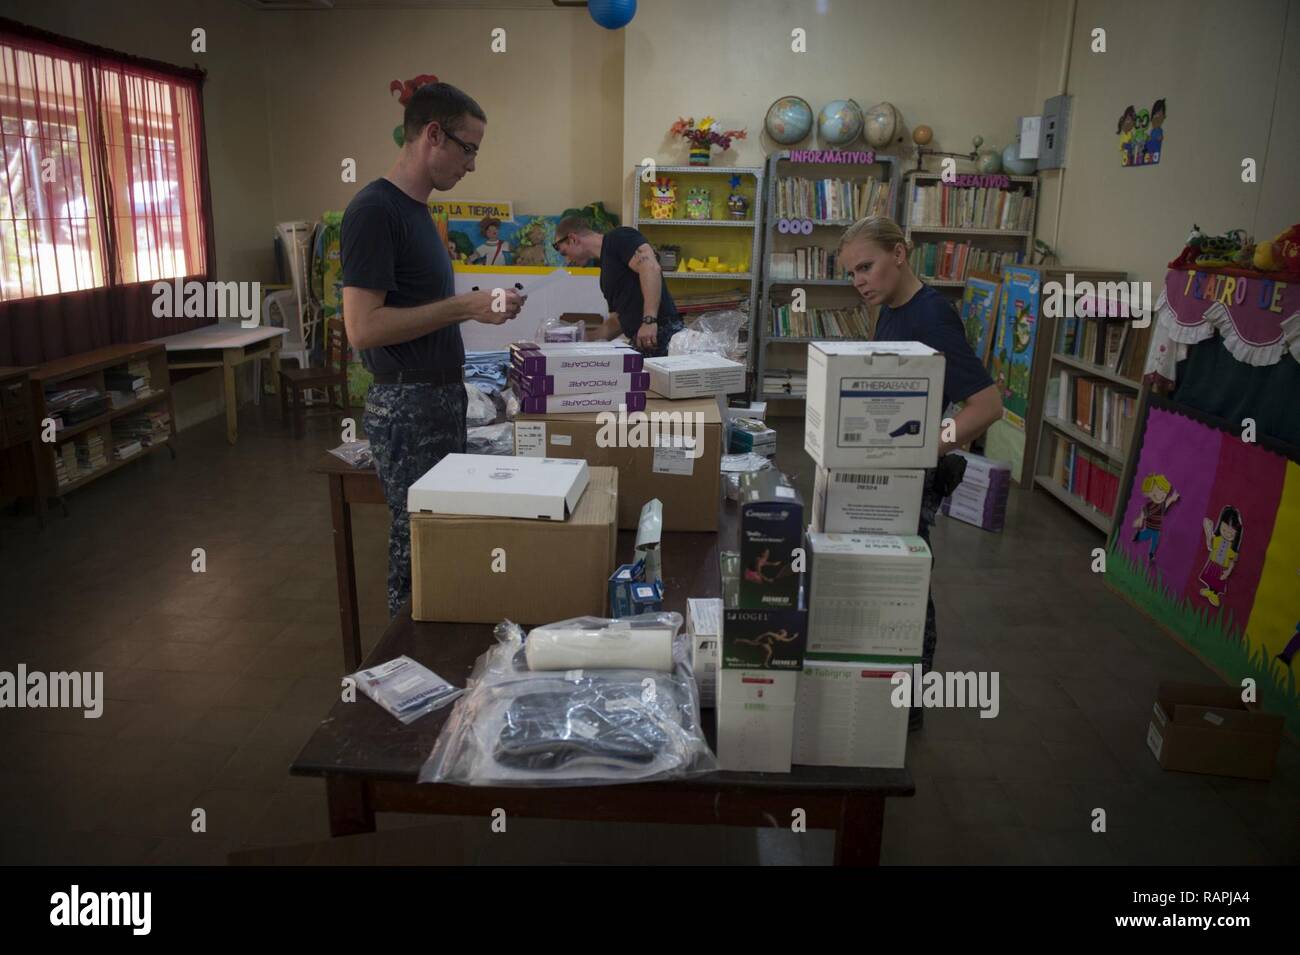 TRUJILLO, Honduras (Feb. 20, 2017) – Sailors organize medical supplies at the Continuing Promise 2017 (CP-17) medical site in support of CP-17's visit to Trujillo, Honduras. CP-17 is a U.S. Southern Command-sponsored and U.S. Naval Forces Southern Command/U.S. 4th Fleet-conducted deployment to conduct civil-military operations including humanitarian assistance, training engagements, and medical, dental, and veterinary support in an effort to show U.S. support and commitment to Central and South America. Stock Photo